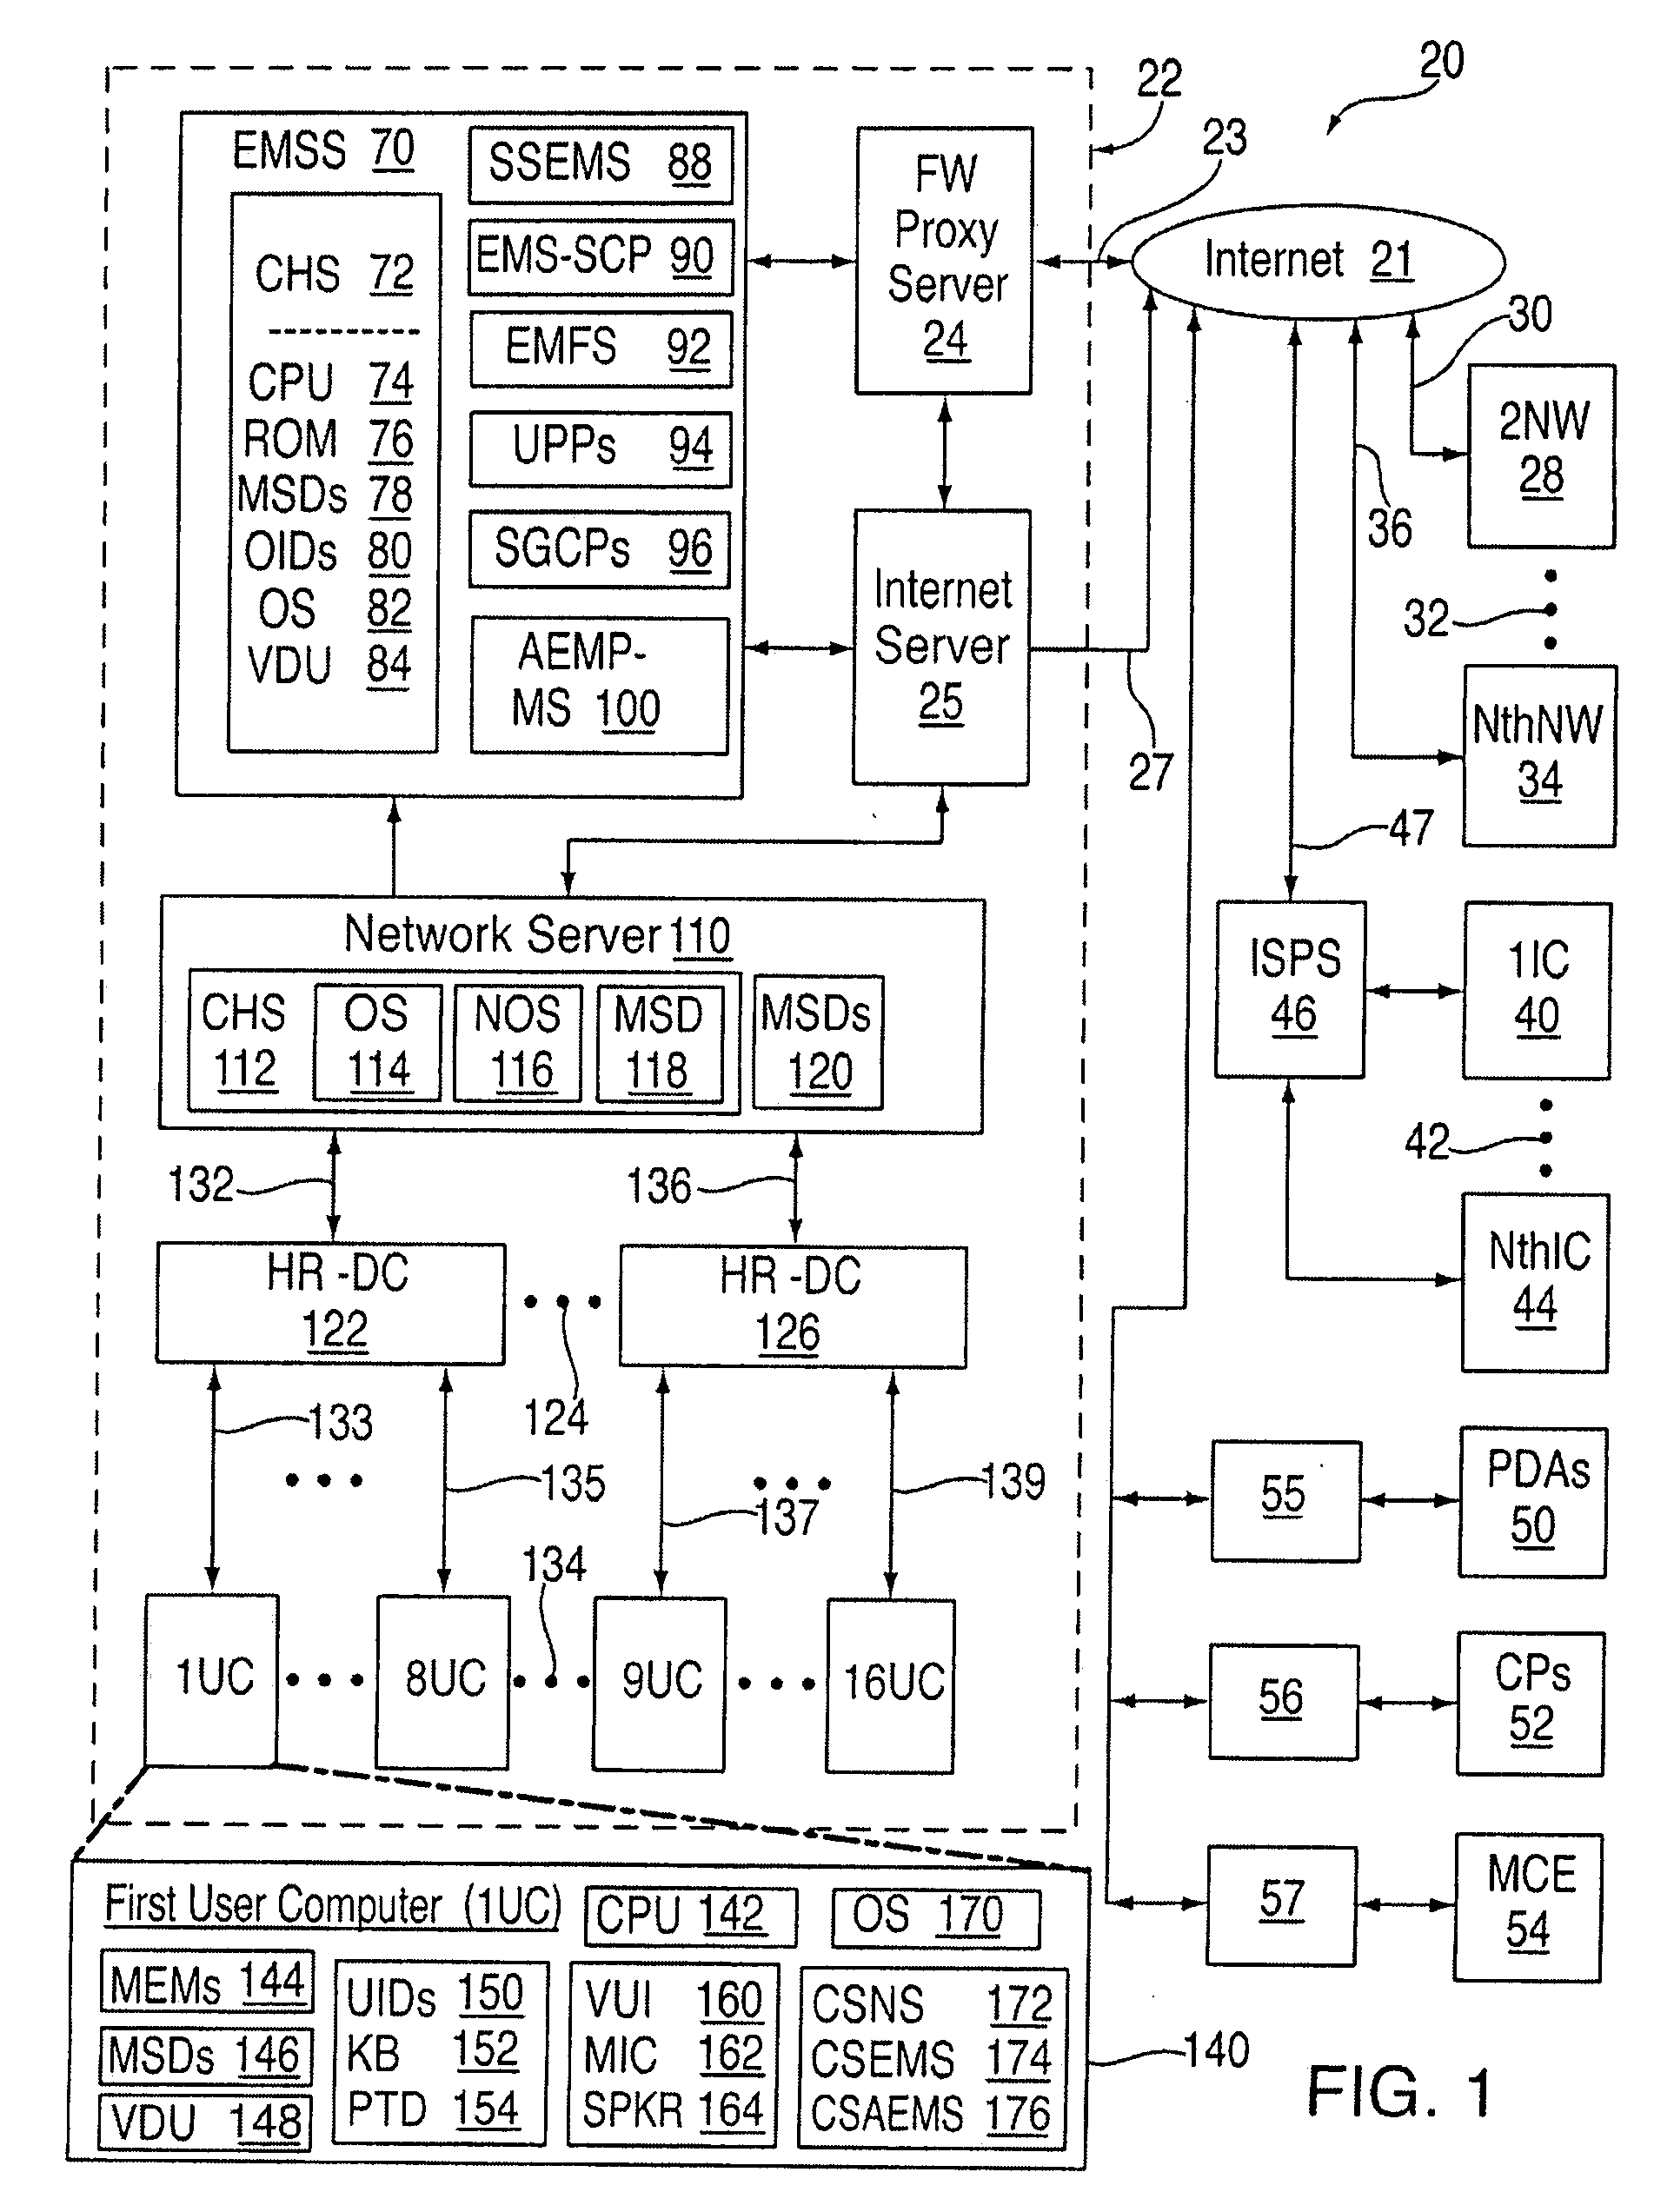 Autonomic e-mail processing system and method